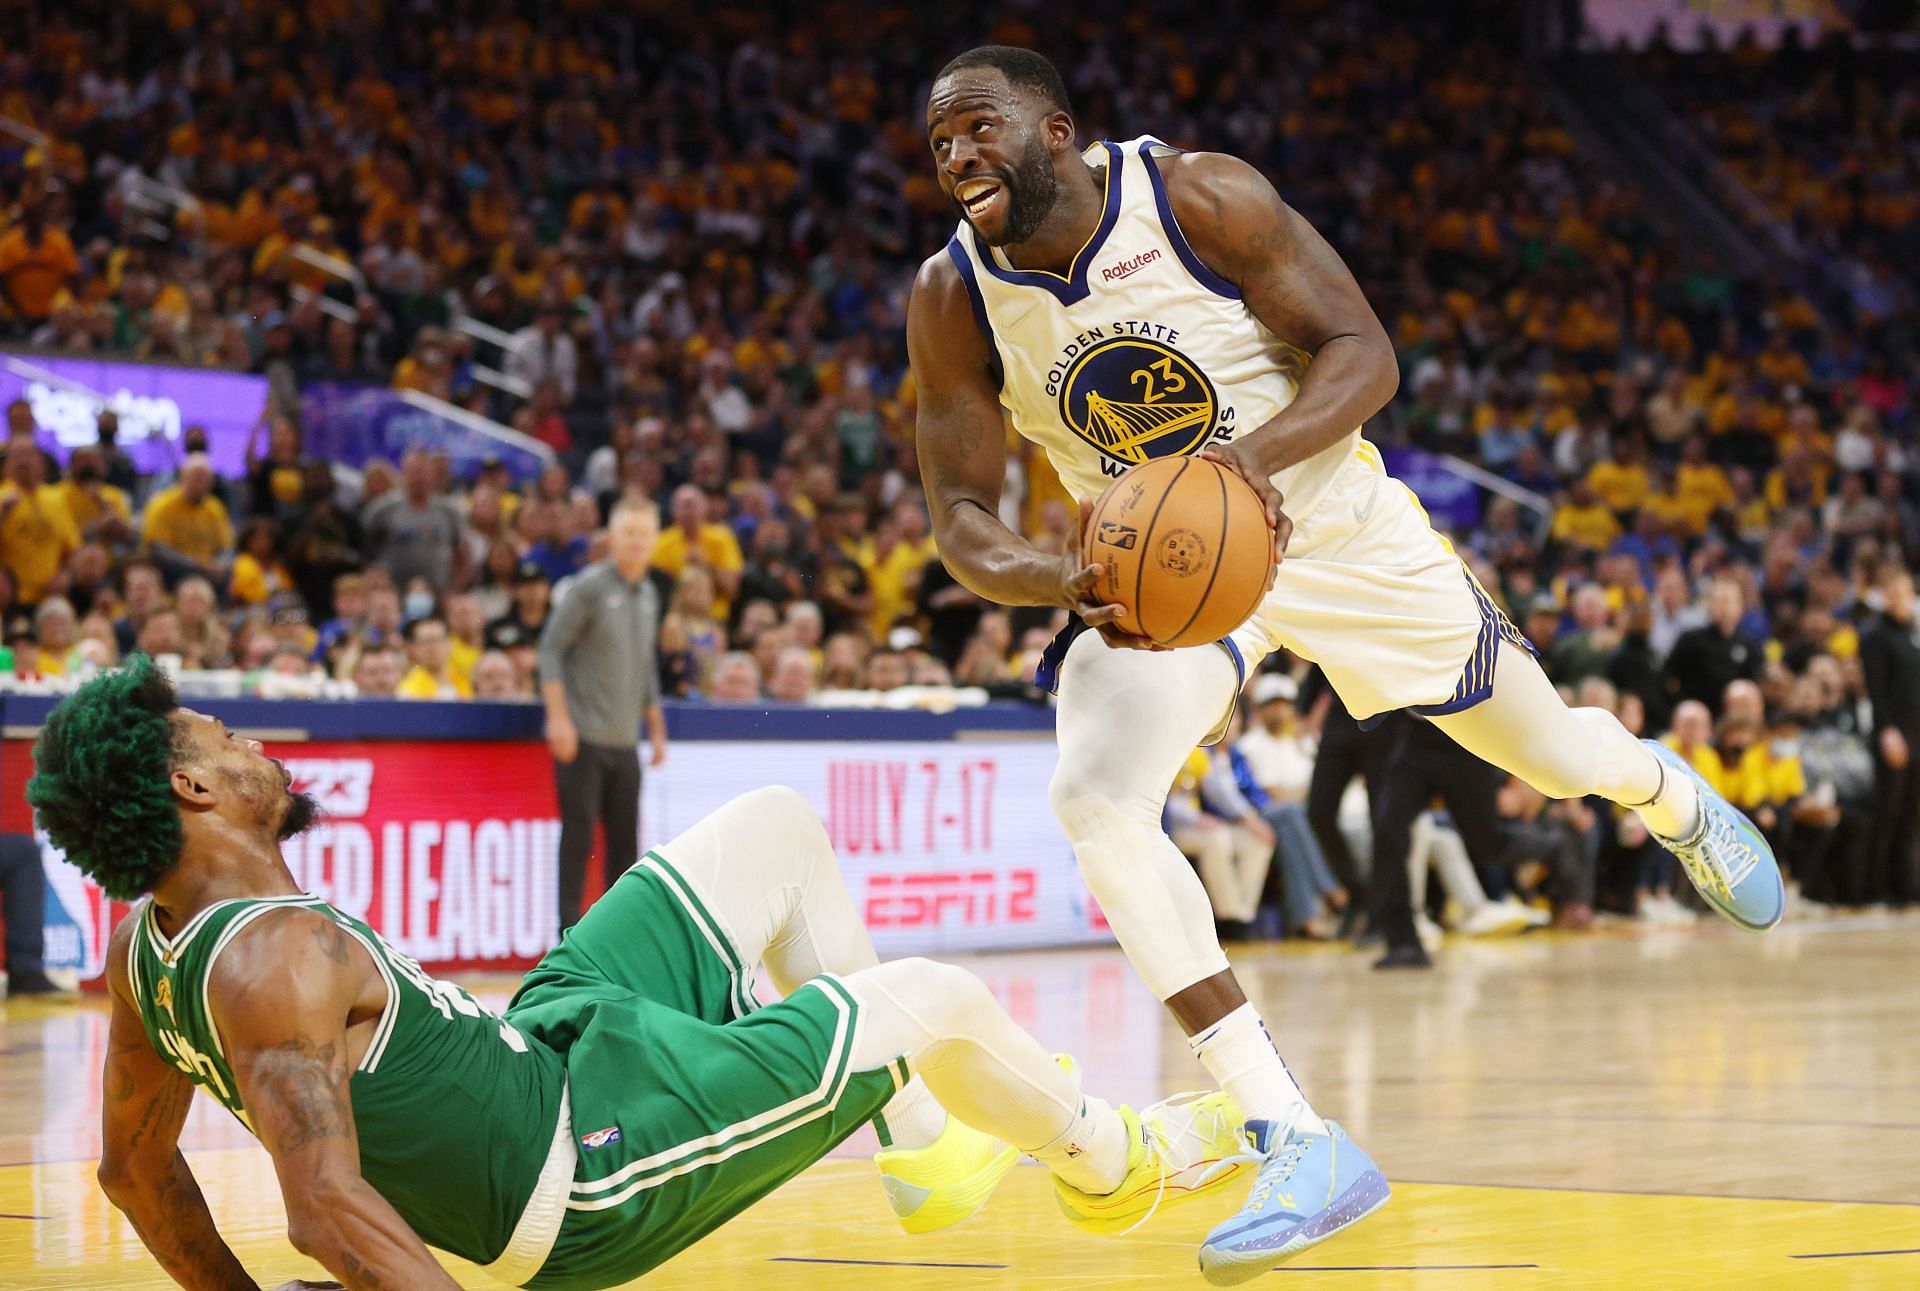 Draymond Green of the Golden State Warriors drives against Marcus Smart of the Boston Celtics